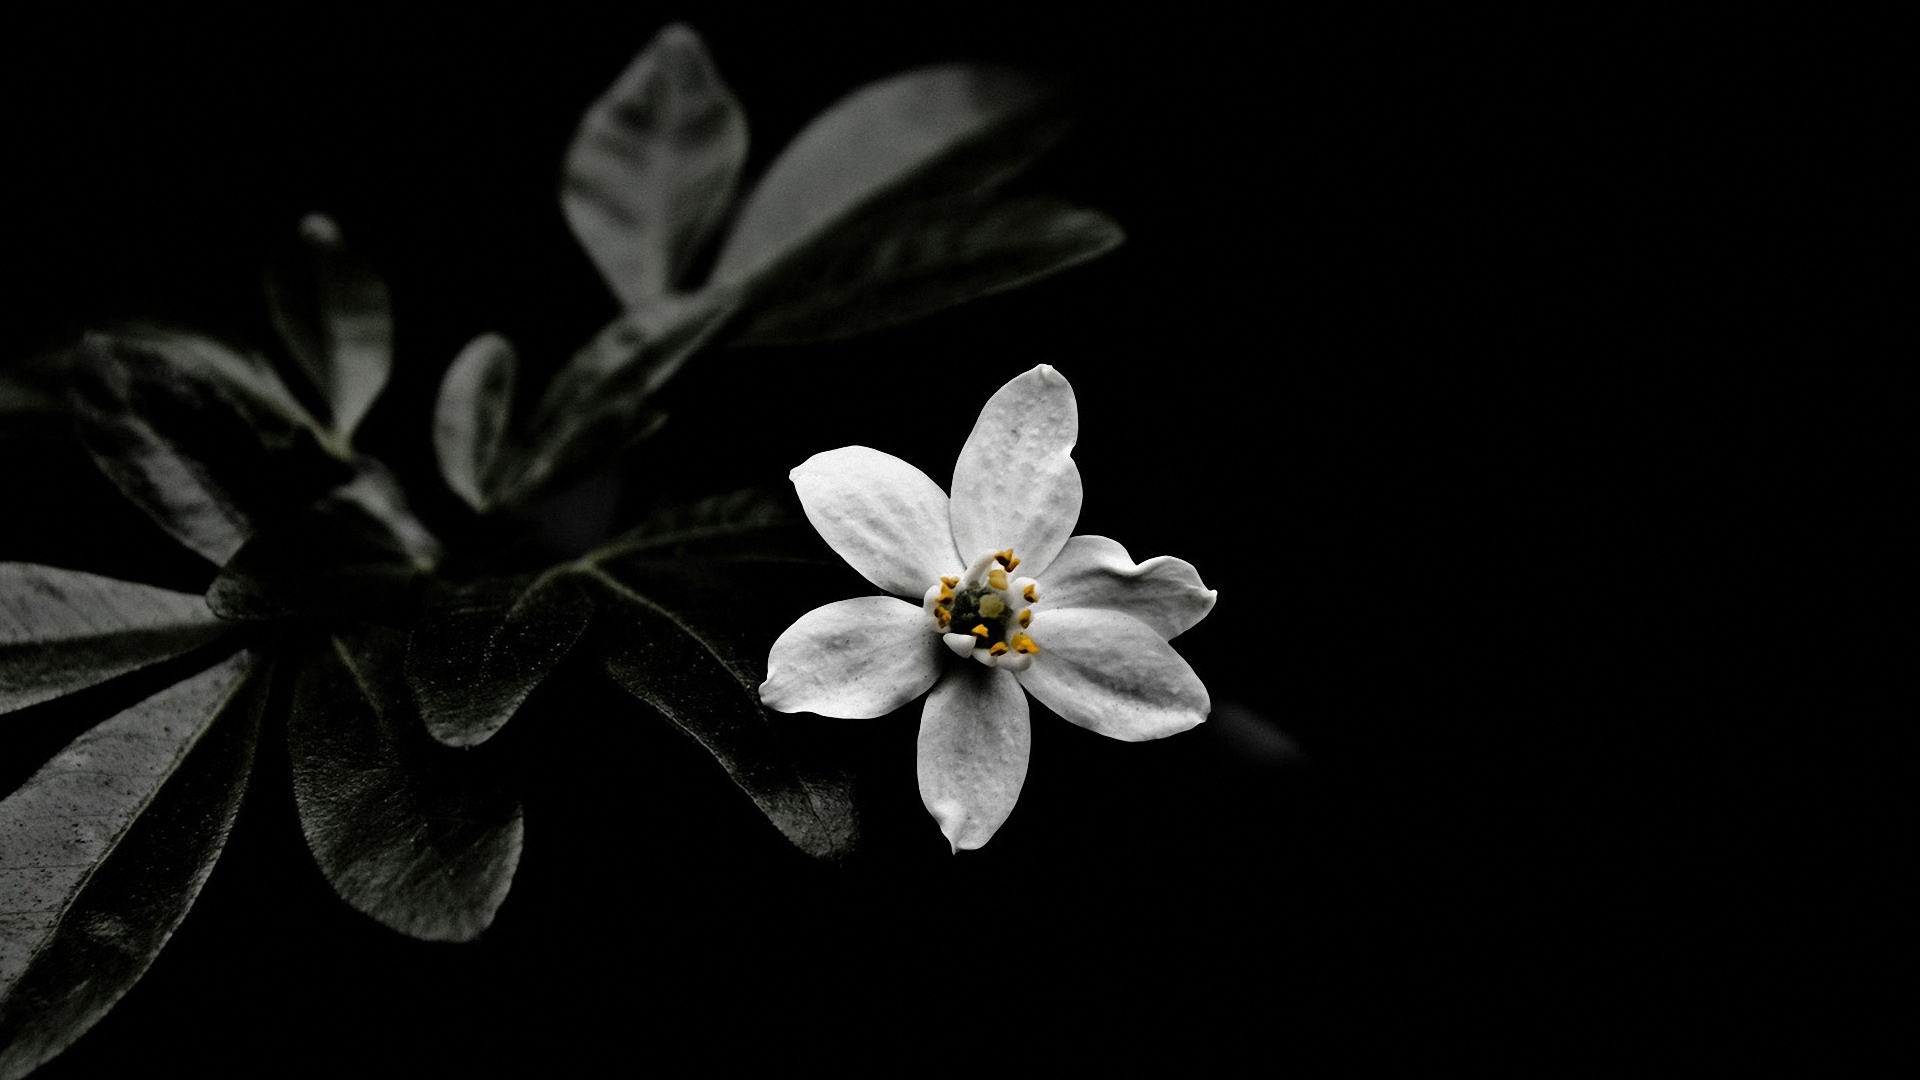 General 1920x1080 white flowers shadow simple background photo manipulation leaves flowers plants